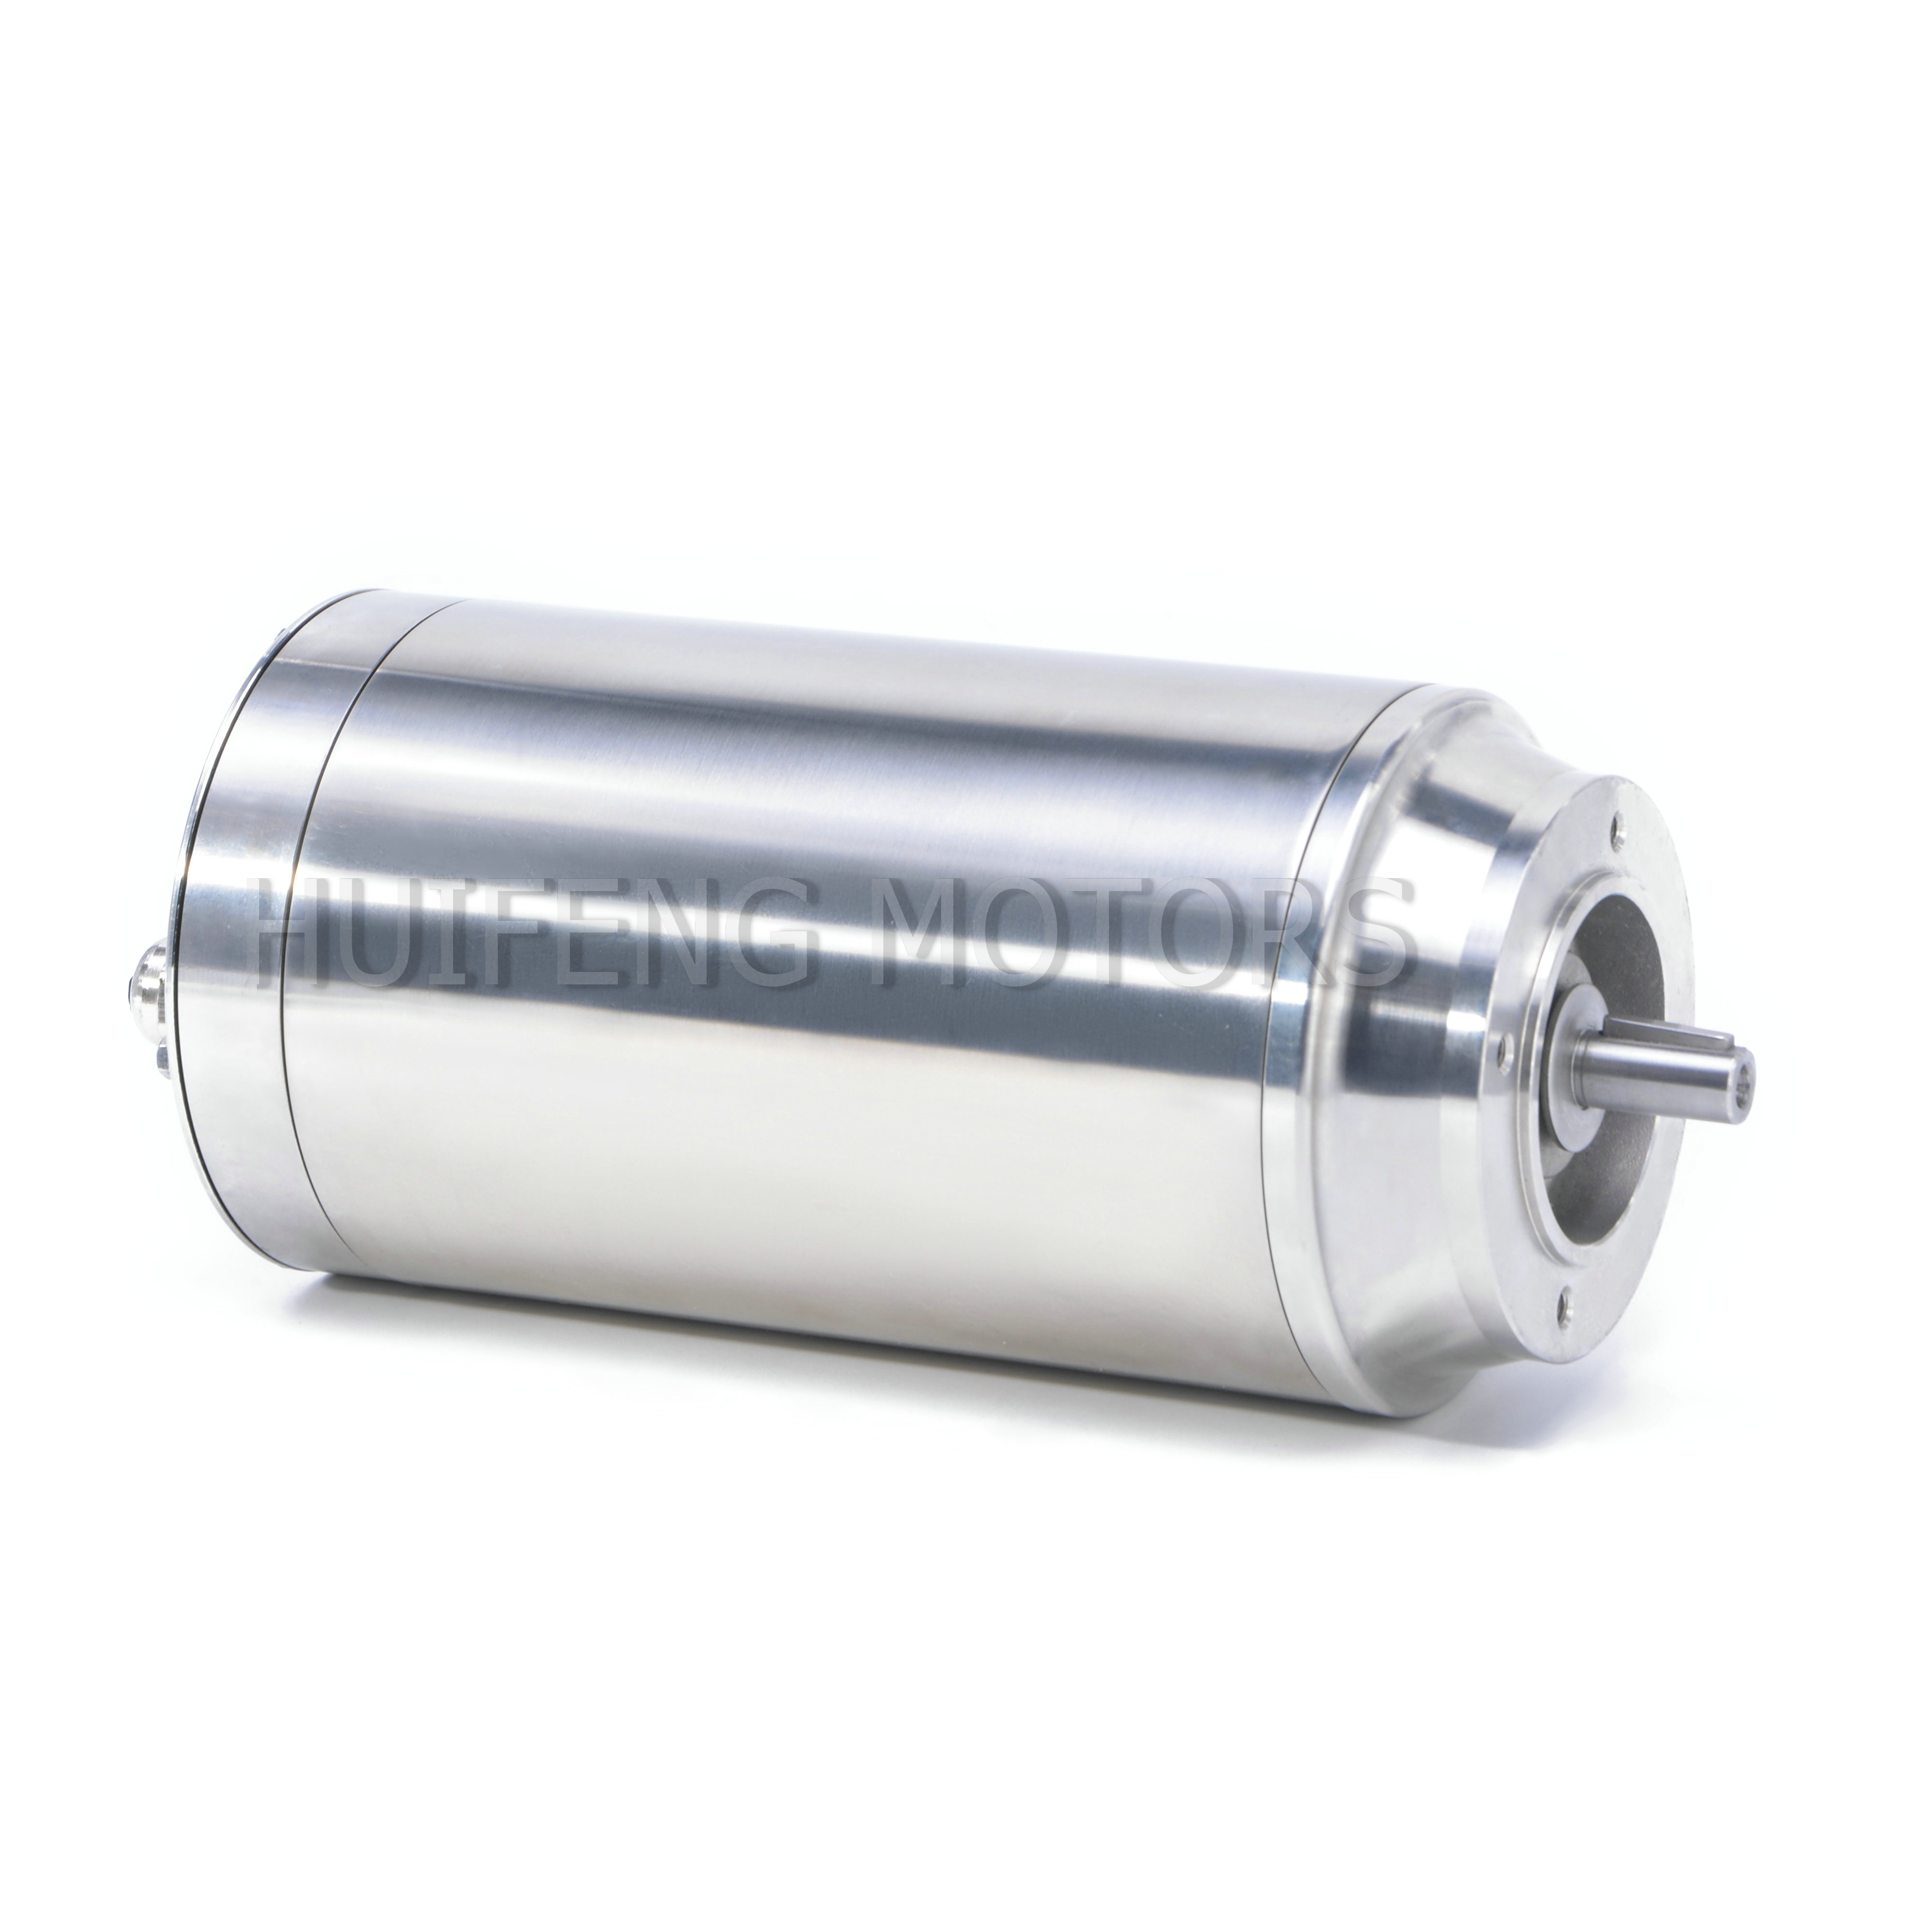 HYW SERIES STAINLESS STEEL PREMIUM THREE PHASE INDUCTION MOTORS